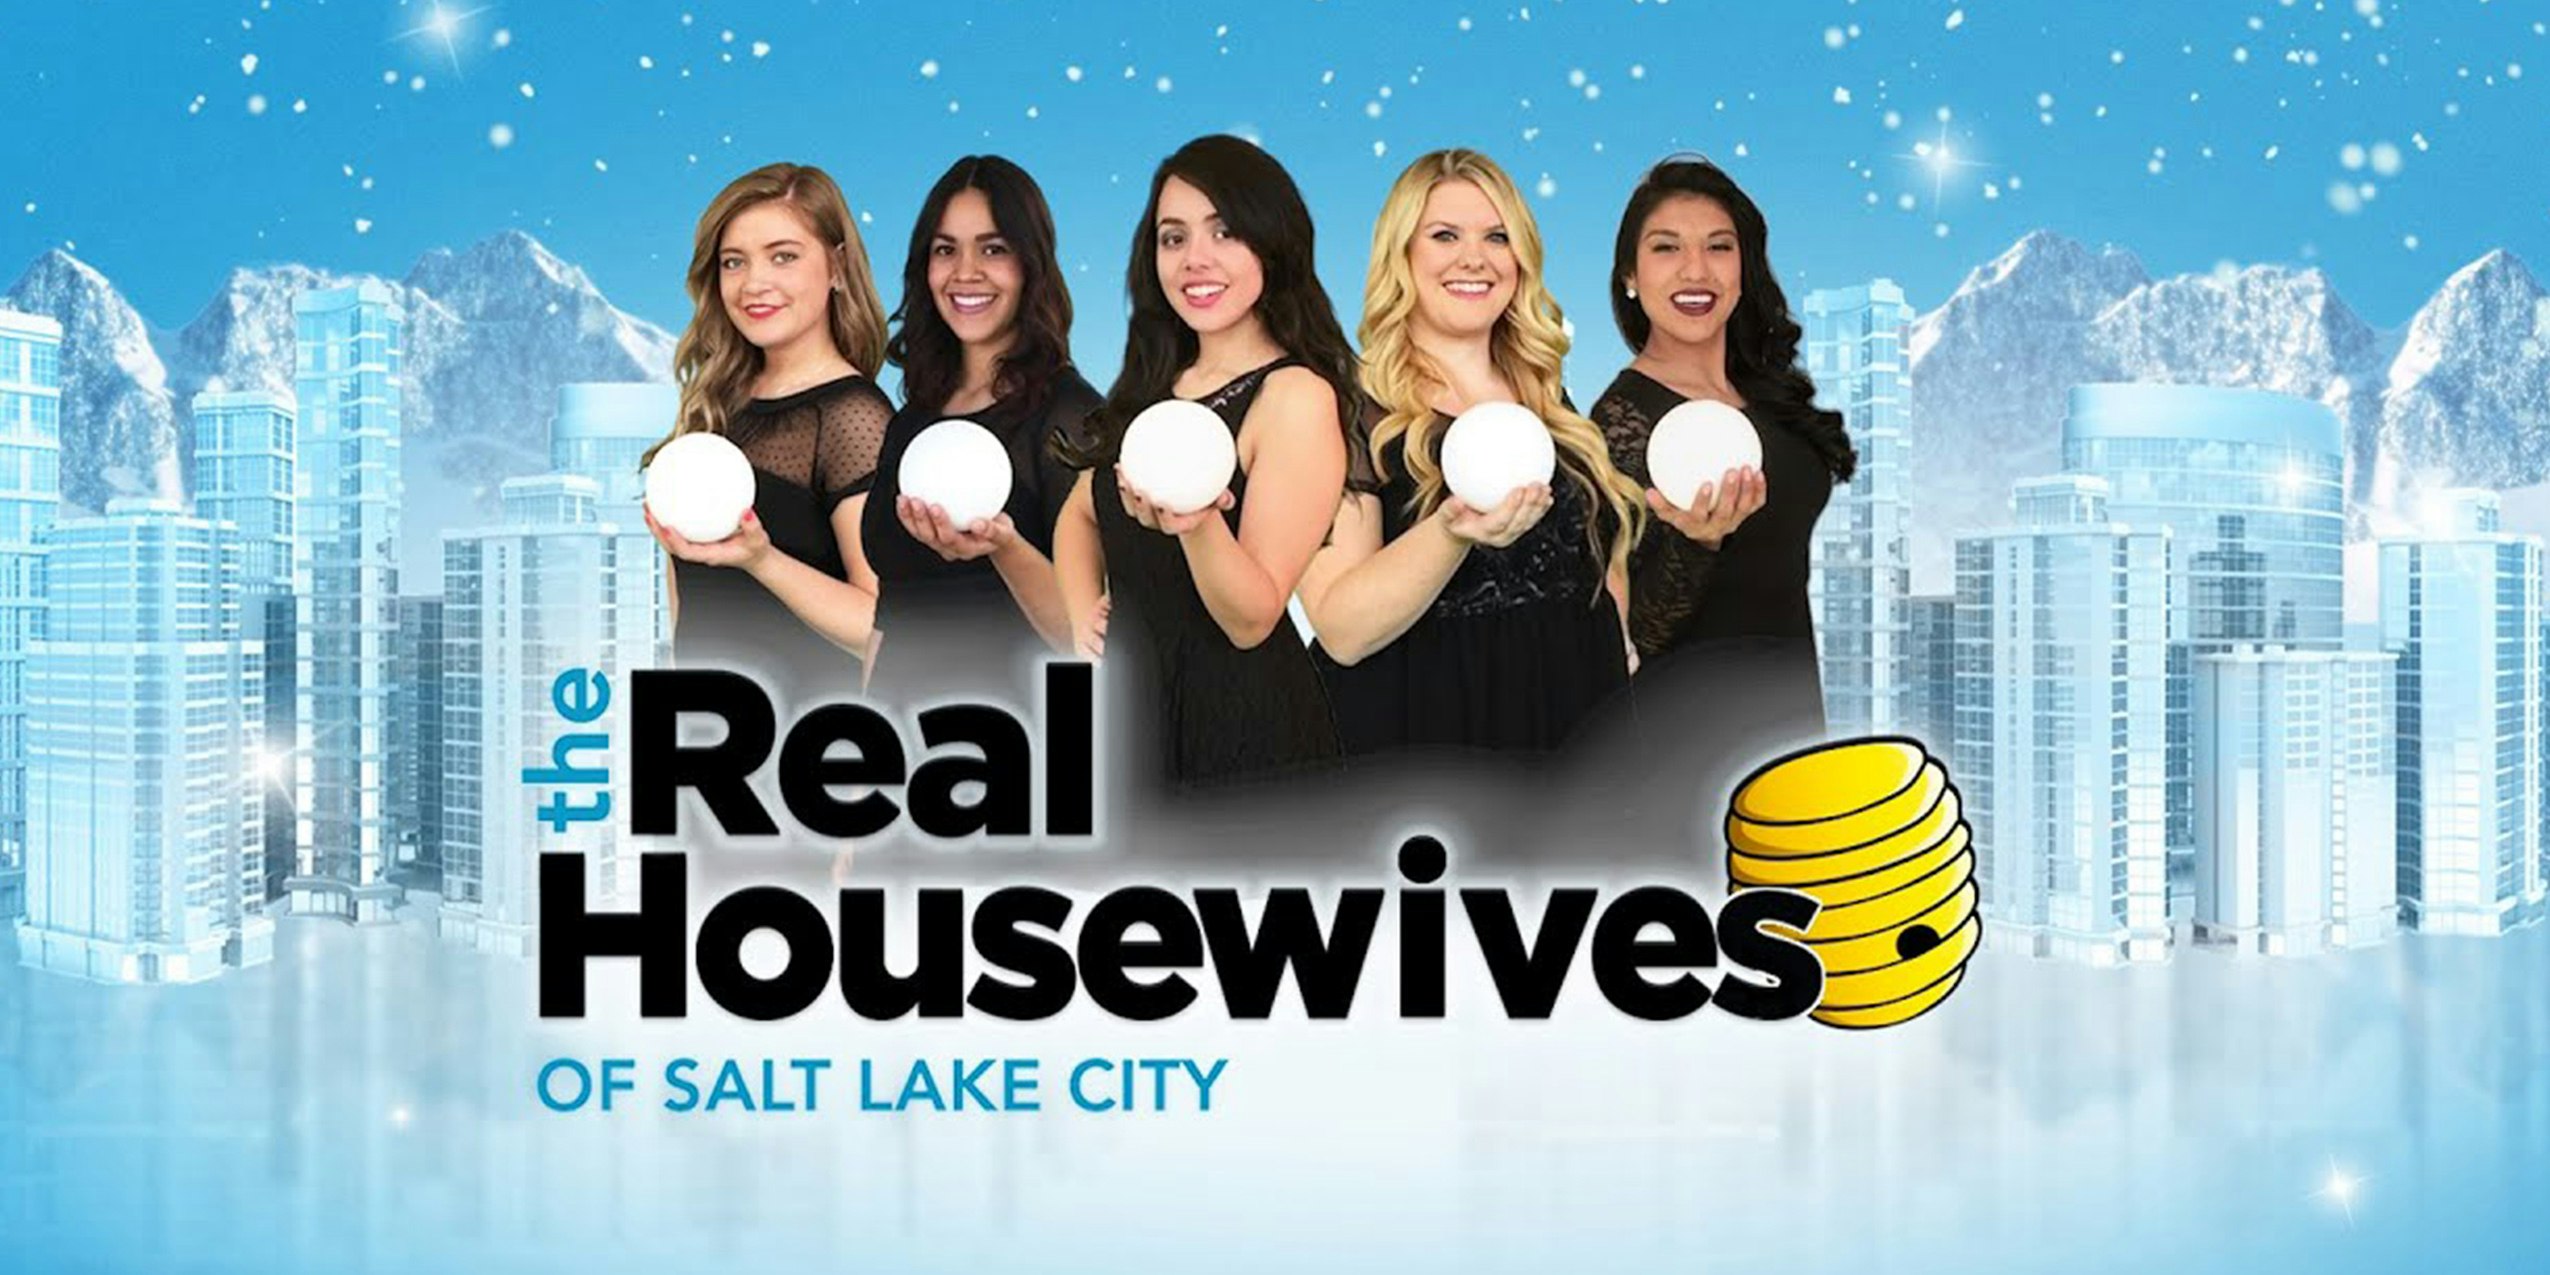 How to stream 'Real Housewives of Salt Lake City'